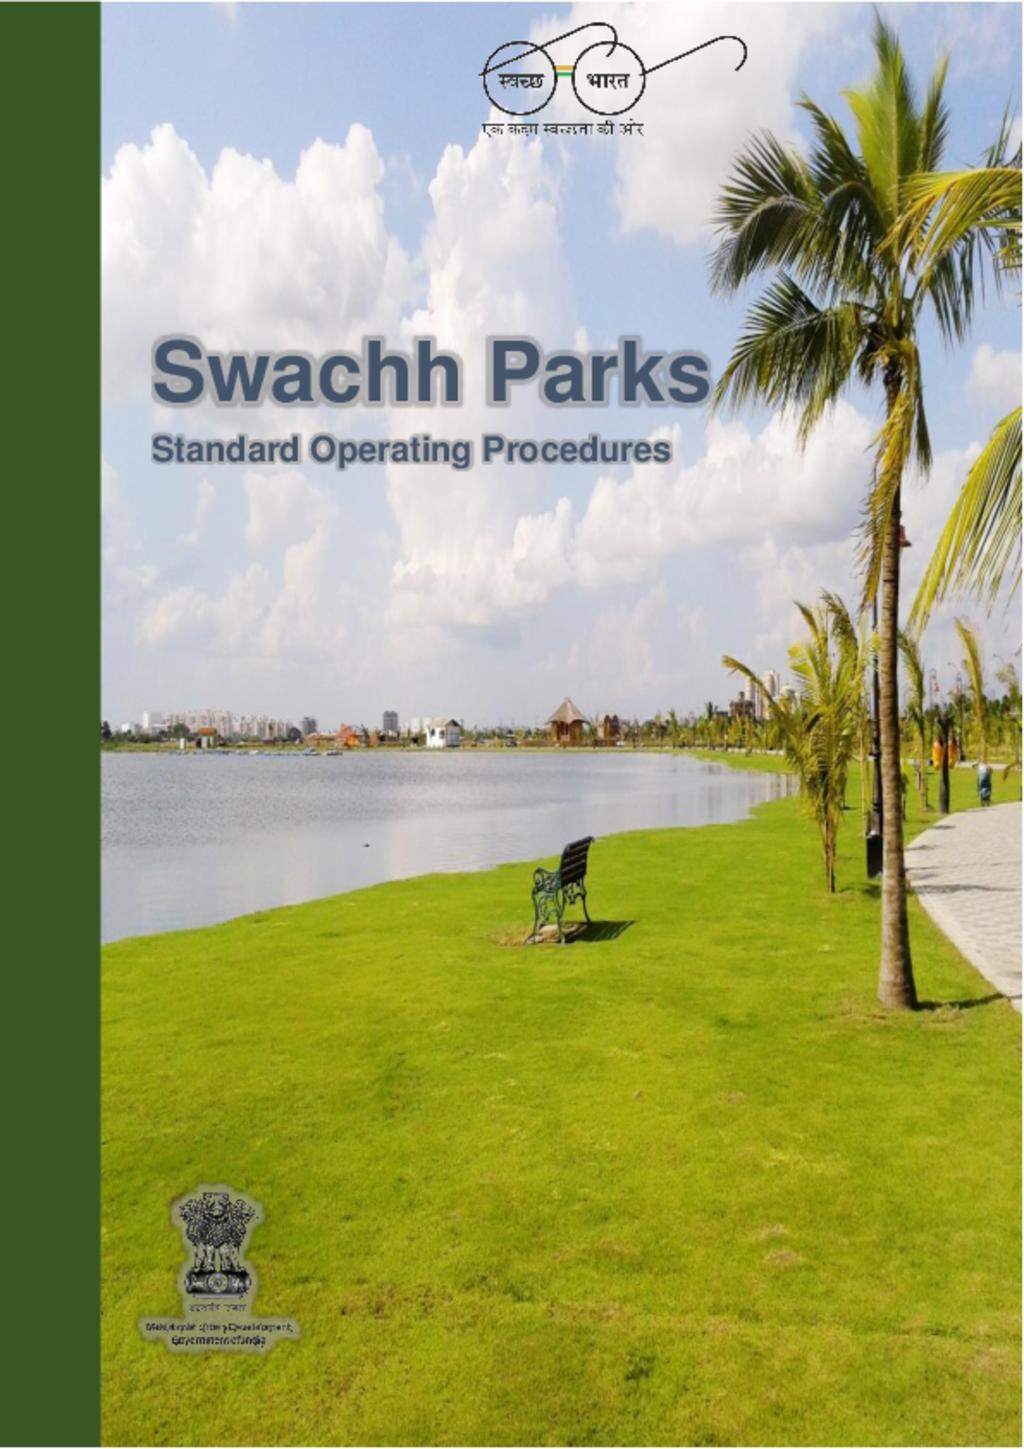 SOP for swachh parks